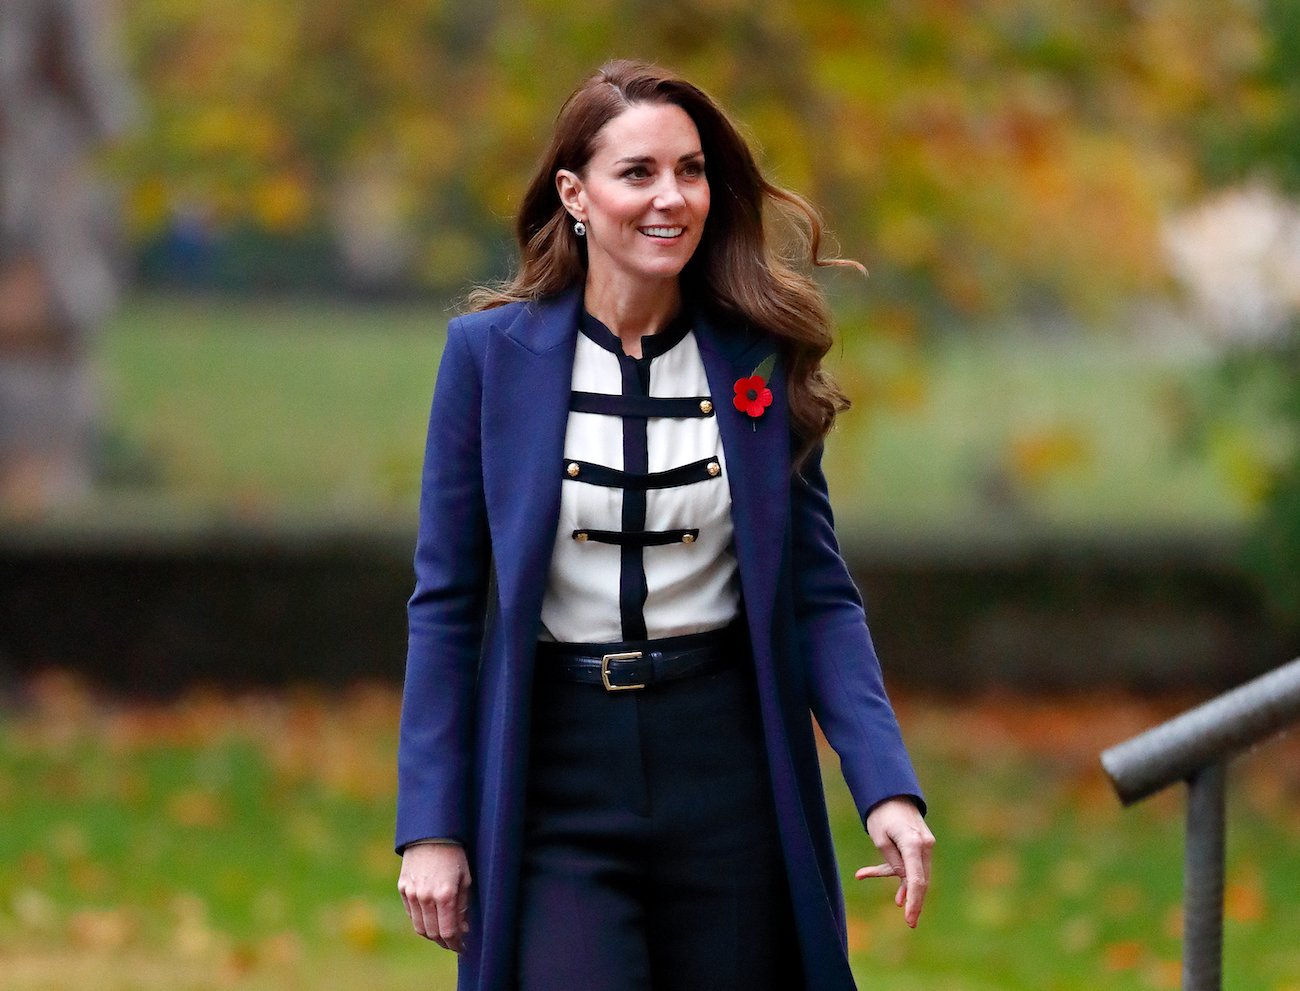 Kate Middleton smiles as she looks on wearing a blue coat, black-and-white shirt, and black pants.